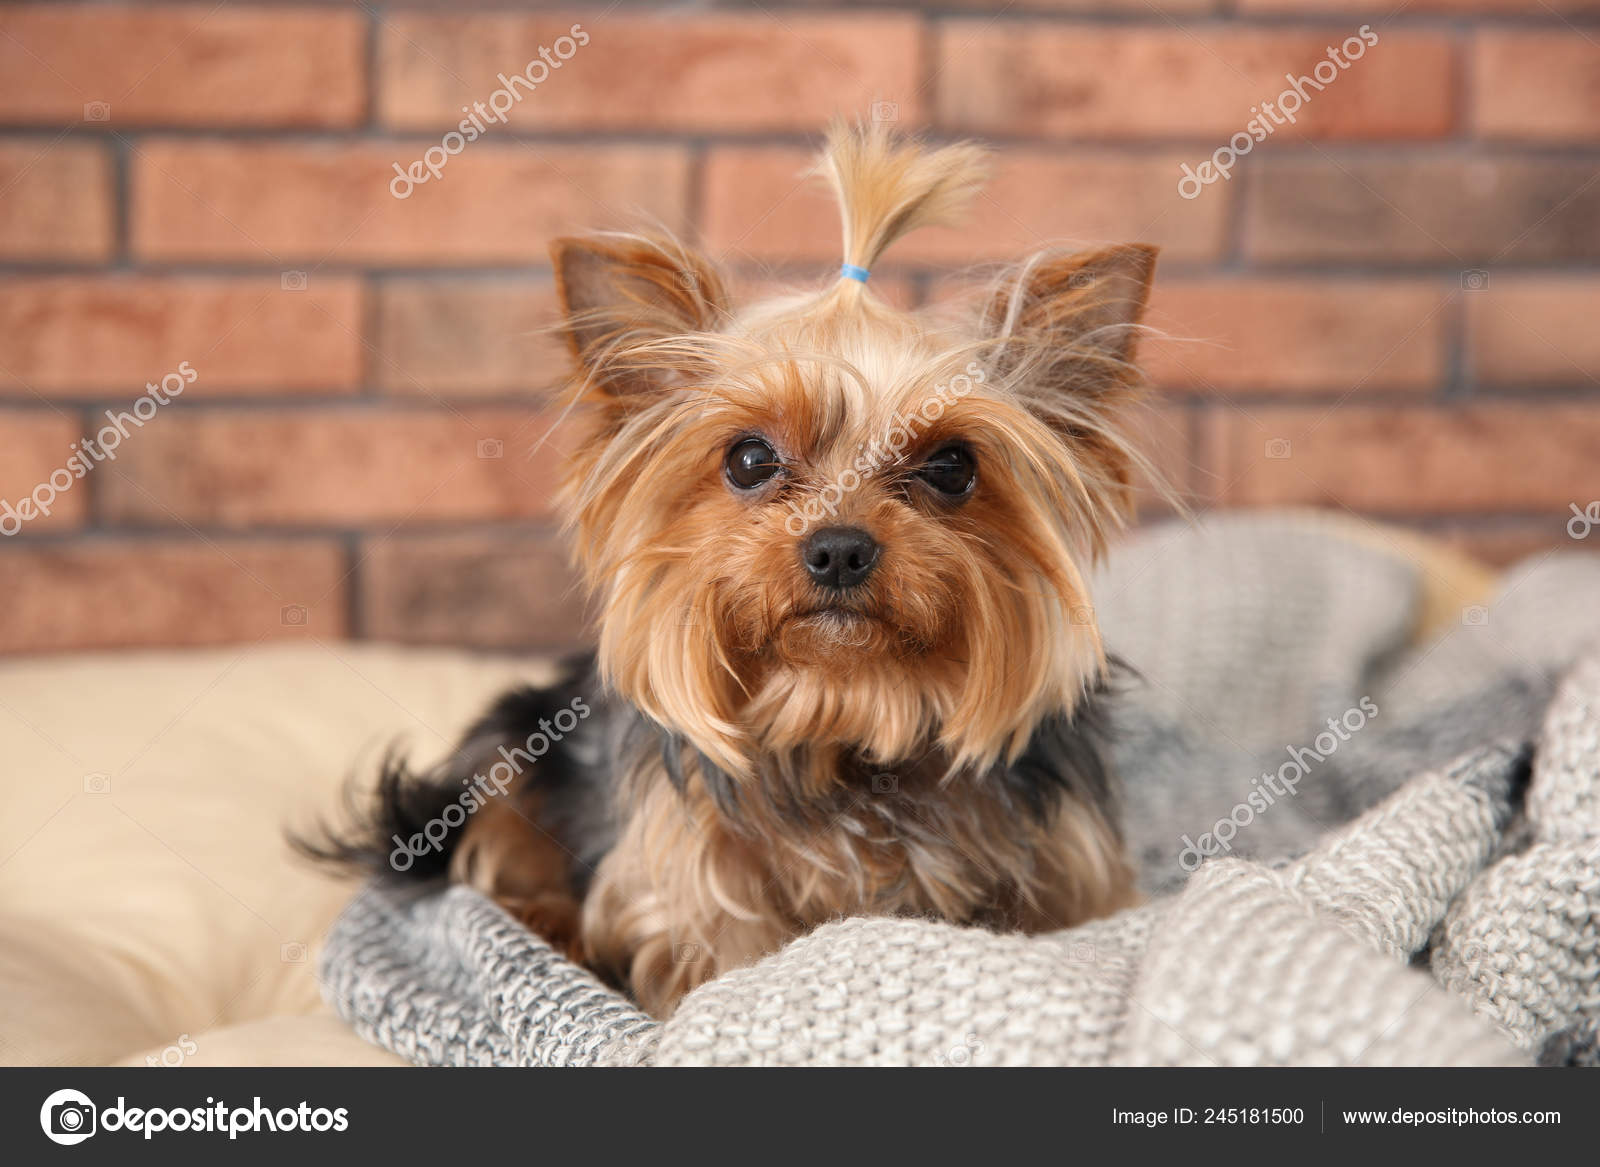 Yorkshire terrier on pet bed against brick wall. Happy dog